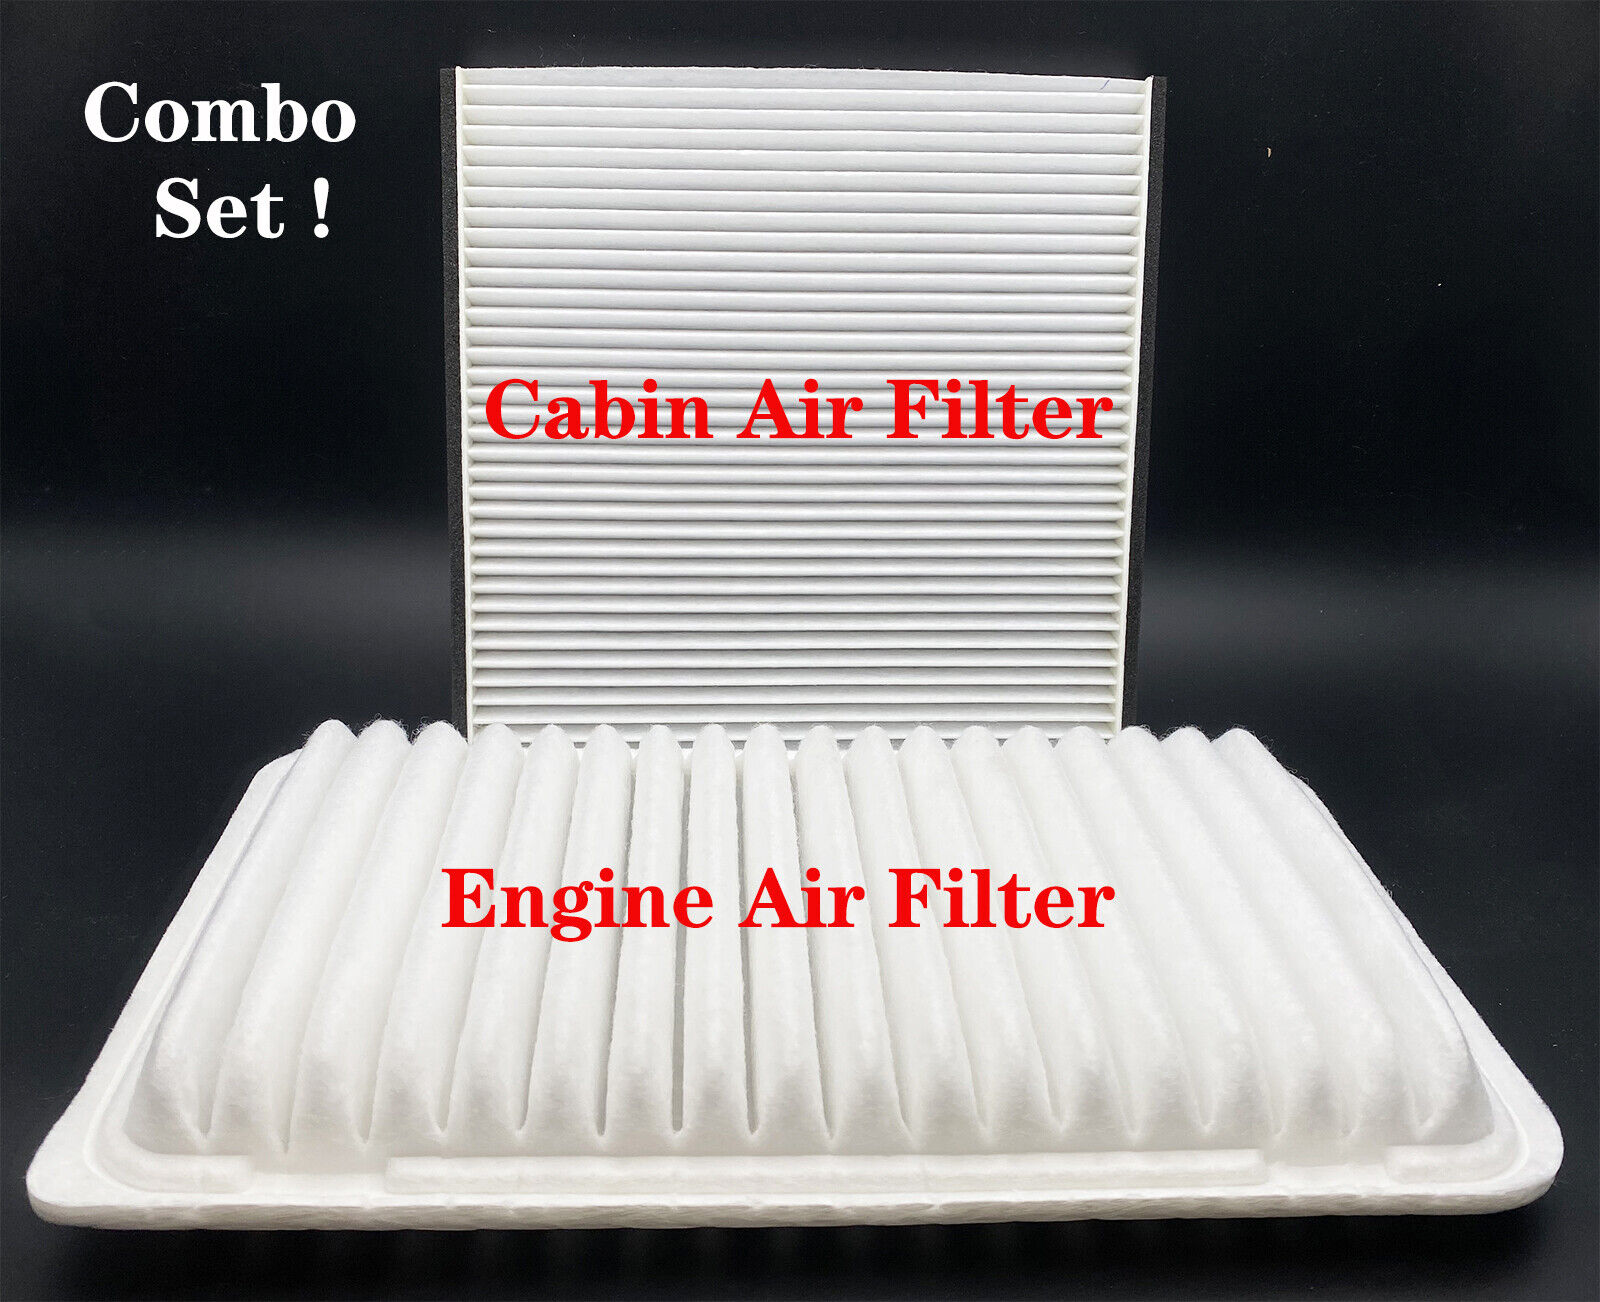 Engine & Cabin Air Filter Combo Set For Toyota Sienna Camry Lexus RX350 ES330